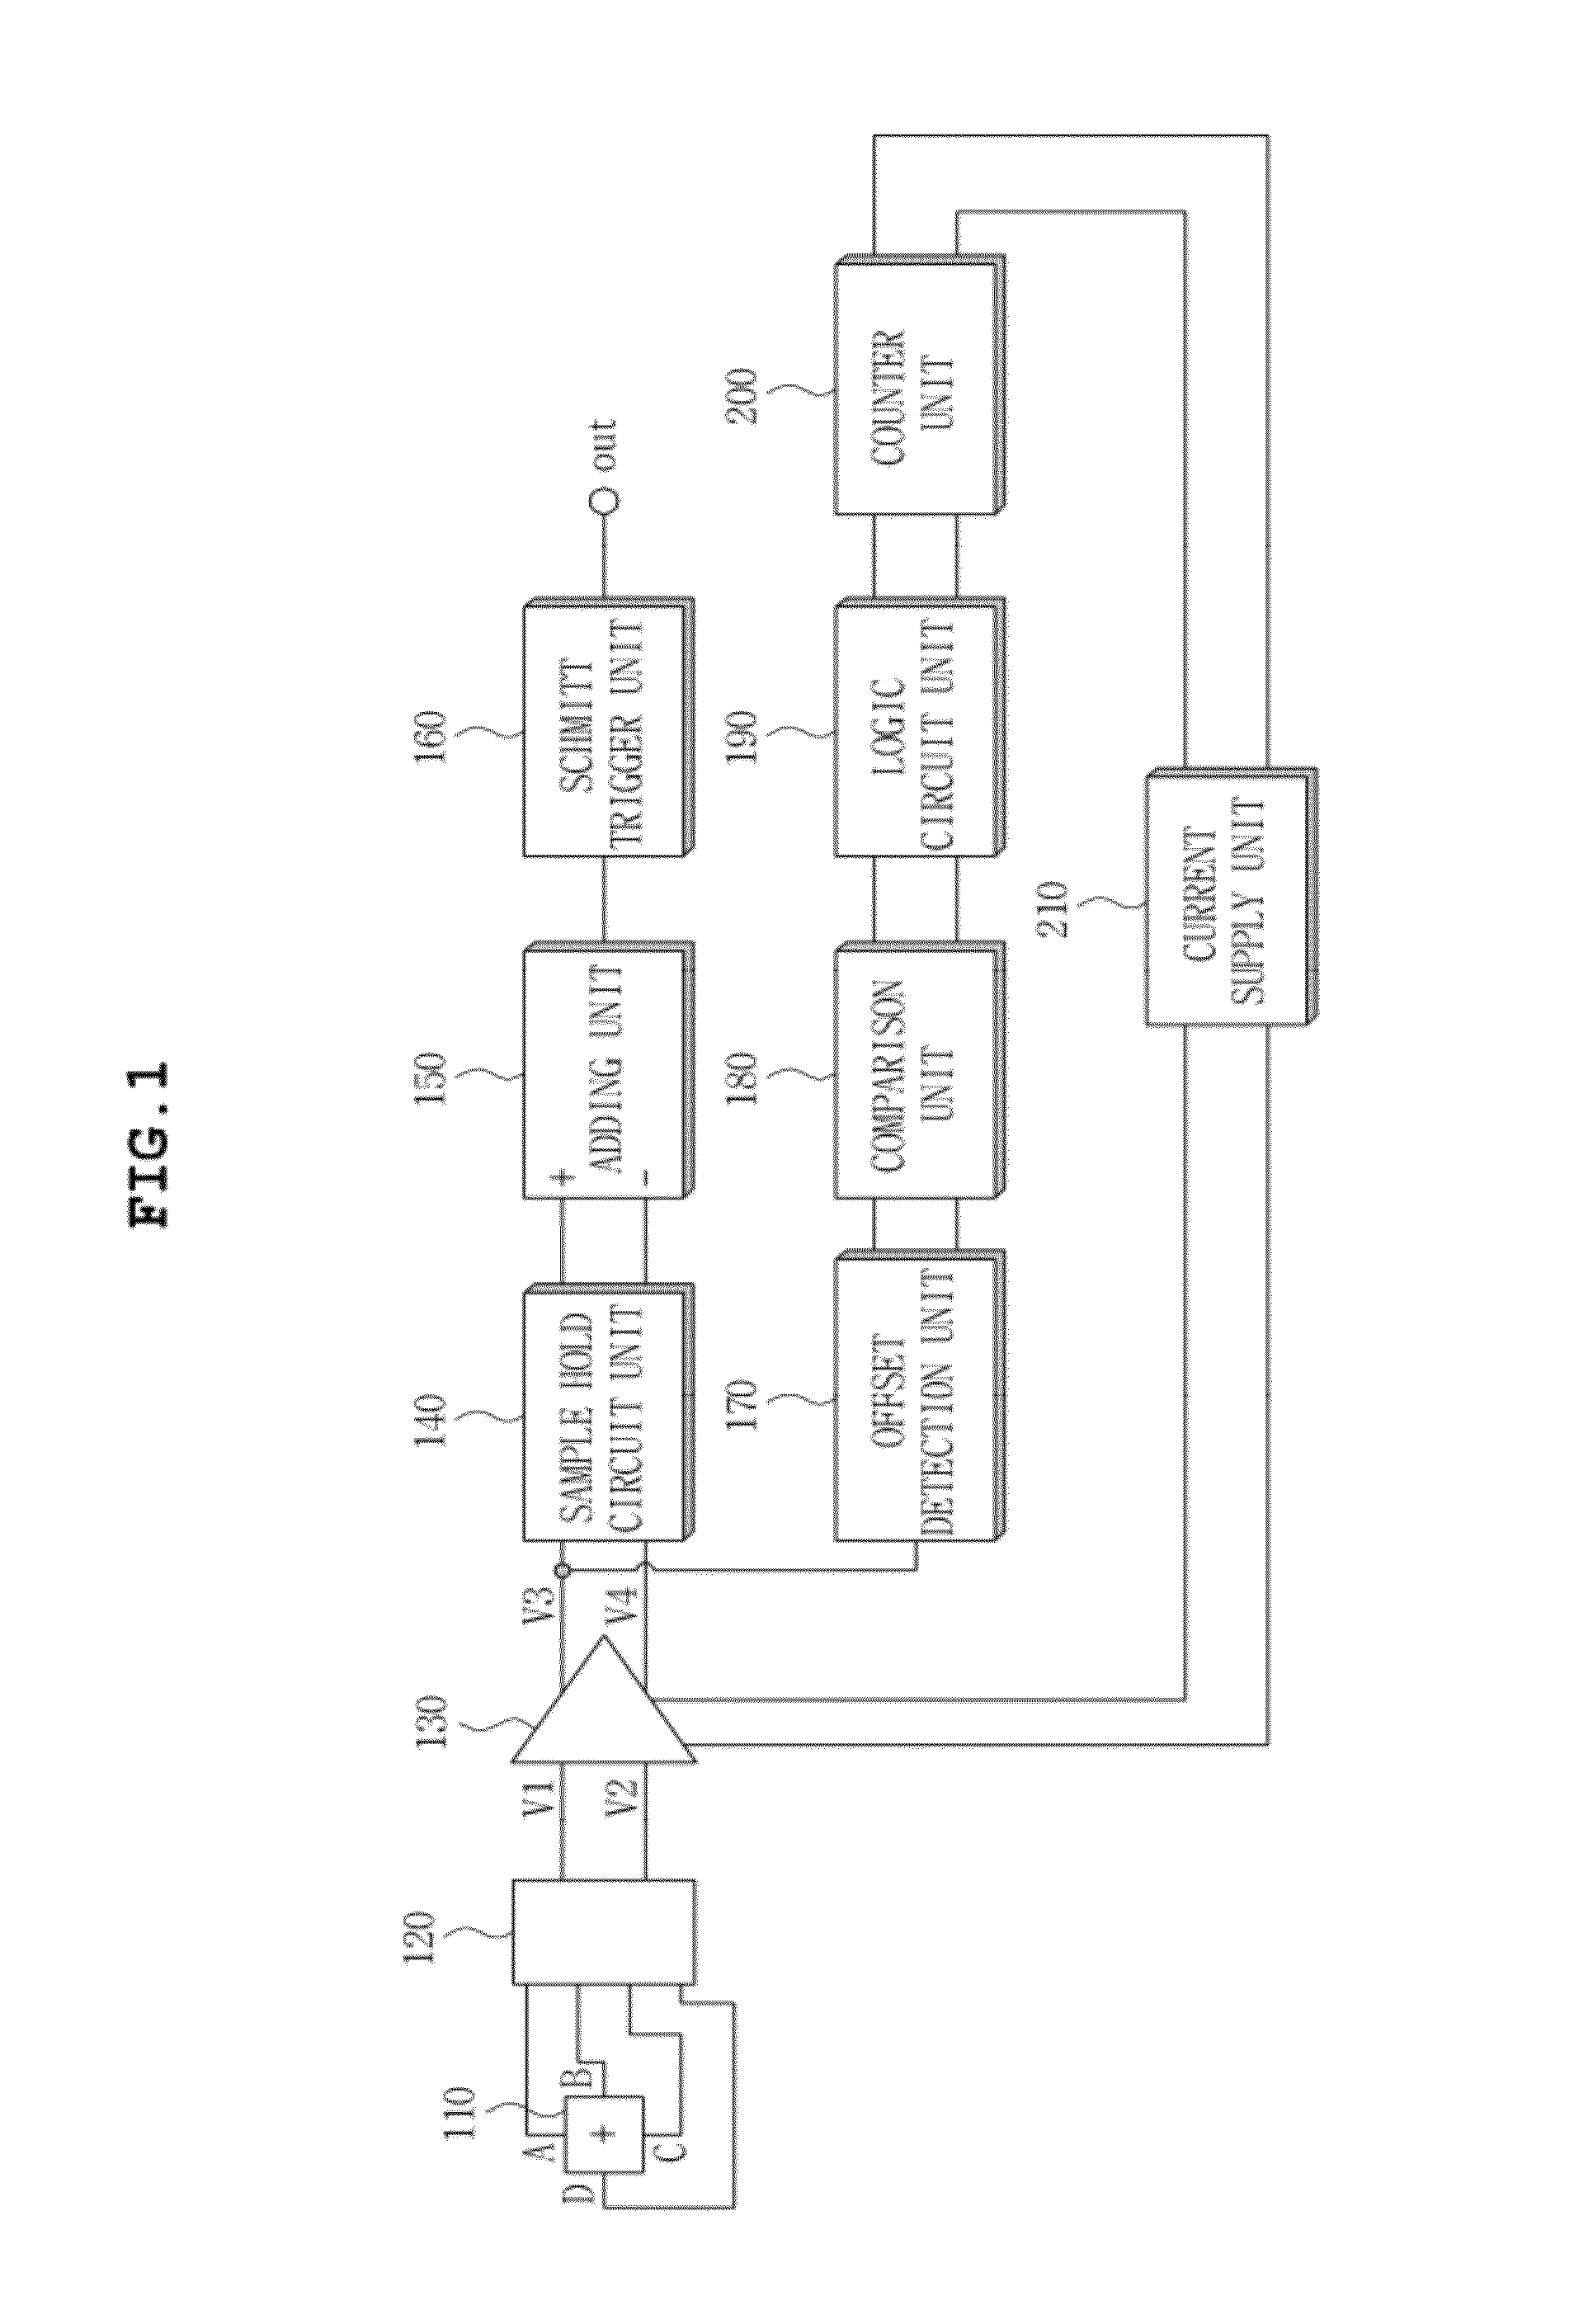 Offset compensation apparatus for magnetic detection circuit and method thereof